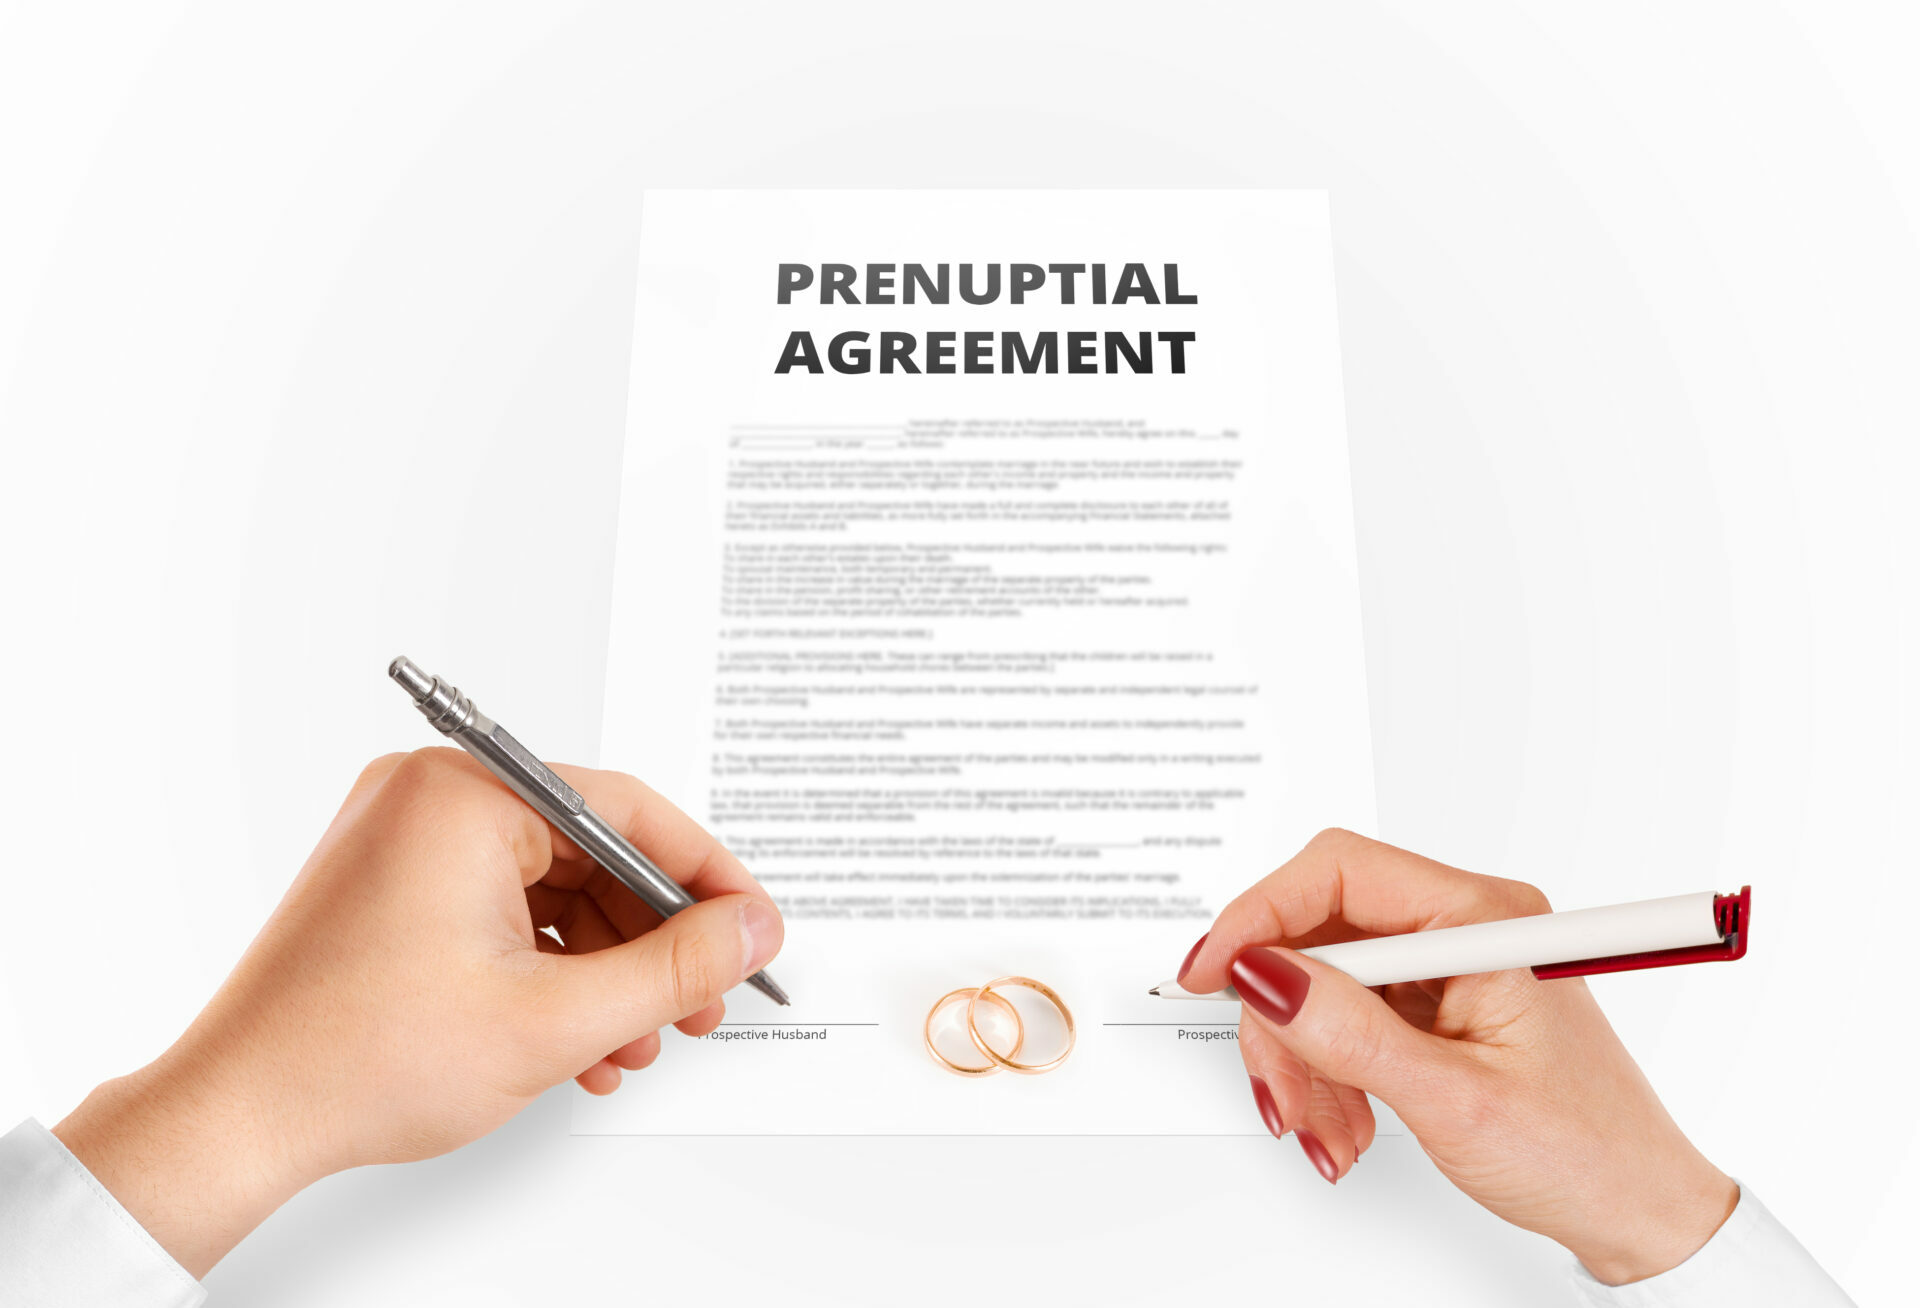 What Should Couples Consider Legally Before Signing a Prenuptial Agreement?